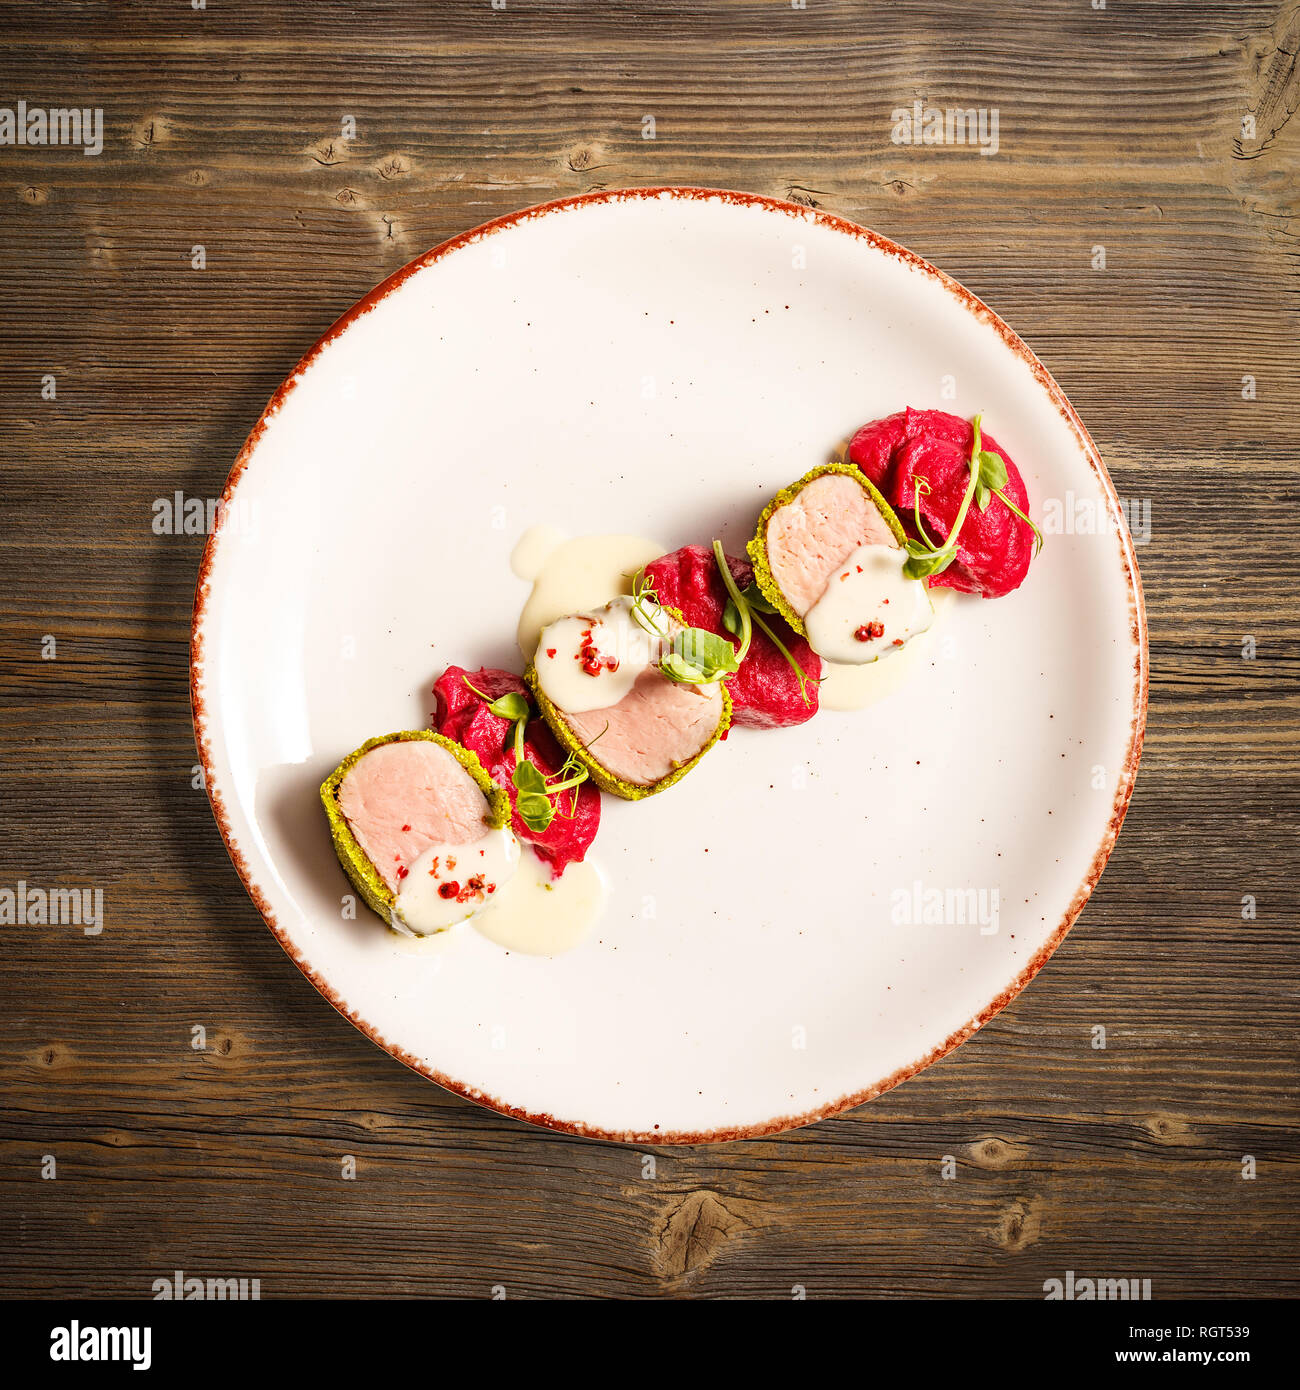 Flat lay of green crusted pork loin, mashed potatoes with beetroot and cheese sauce on wooden background Stock Photo